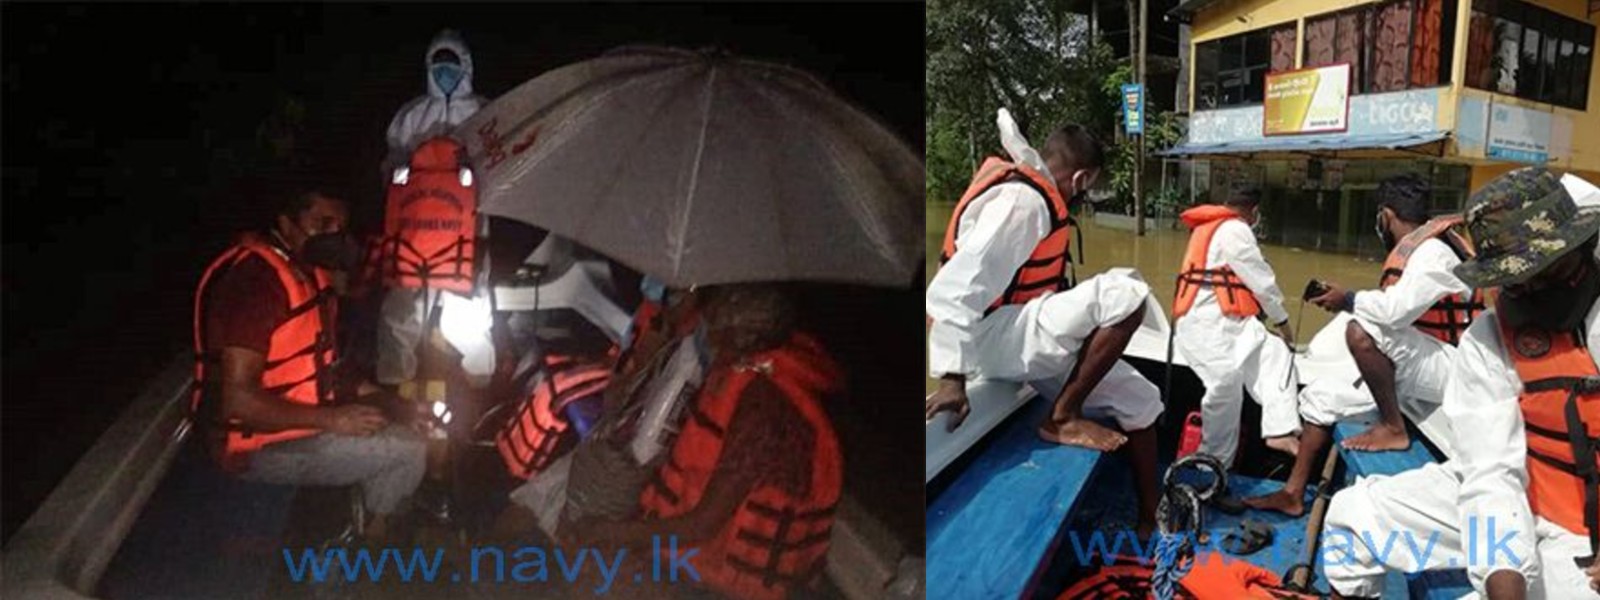 Navy relief teams rescue flood victims trapped in a tree in Galle